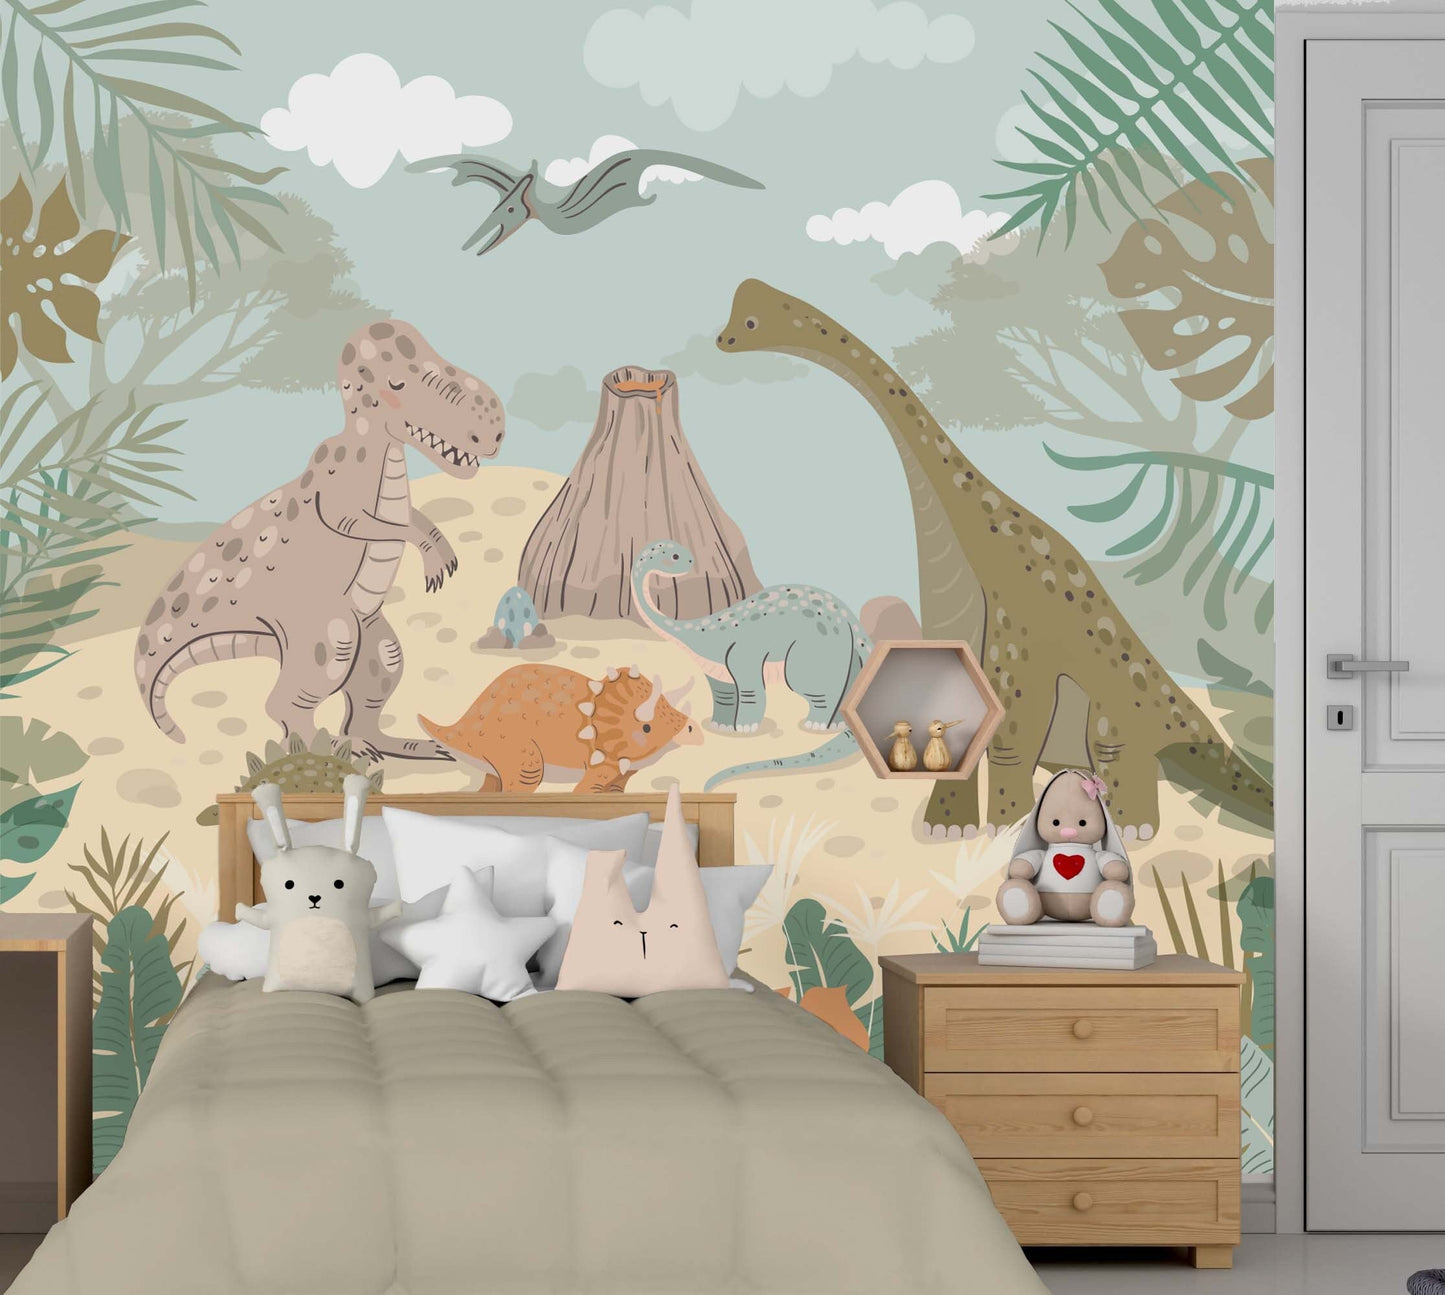 Dinosaur Wallpaper Removable Peel and Stick Dino Wall Murals, WL013_2